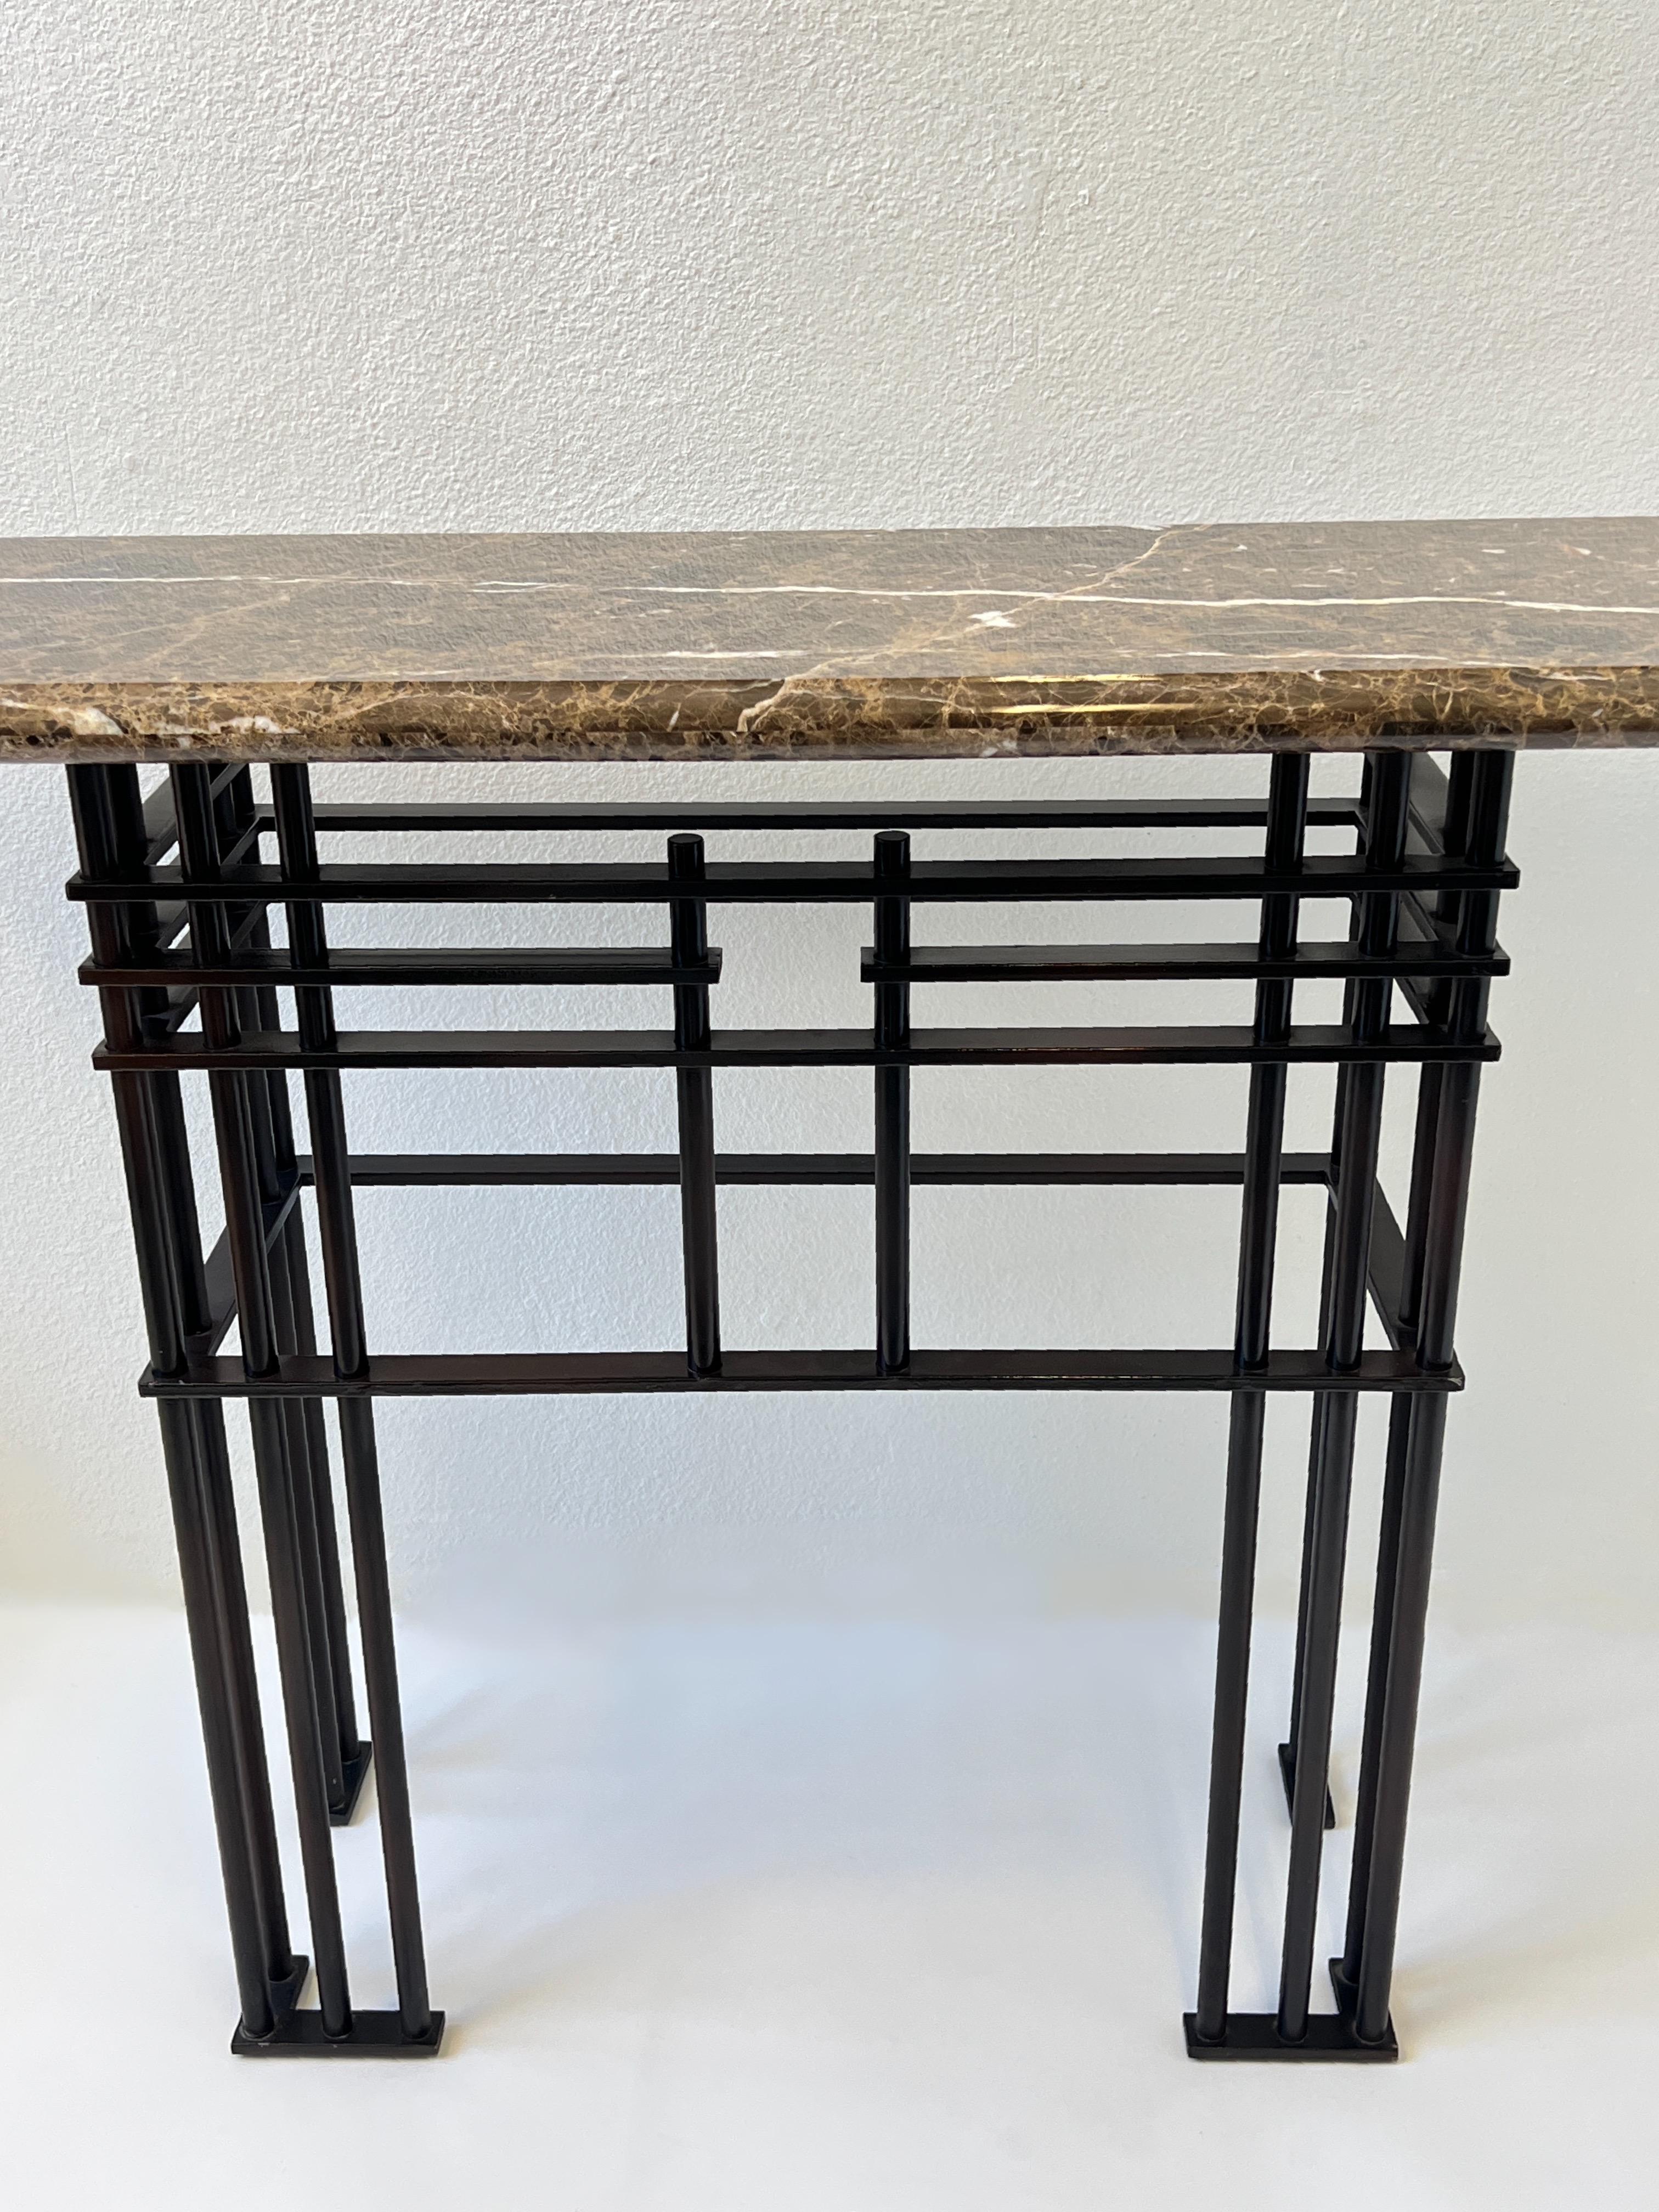 American Marble and Bronze Powder Coated Console Table by Jean Michael Wilmotte for Mirak For Sale